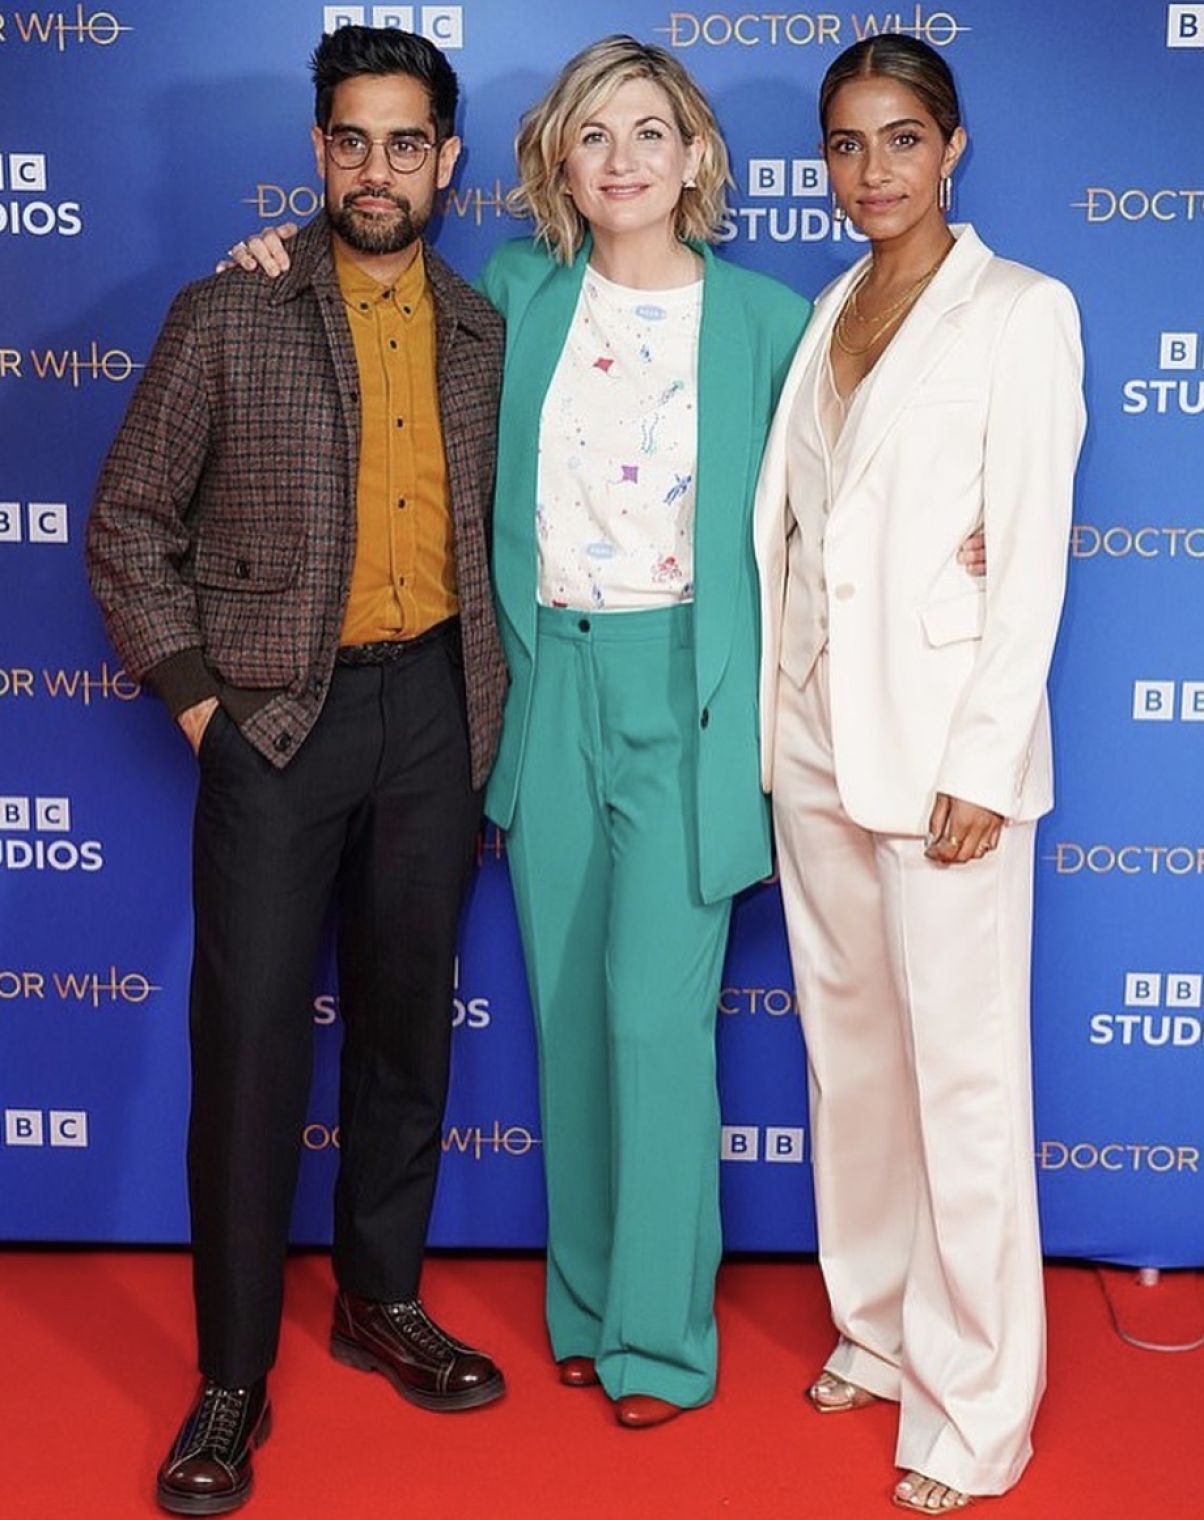 Sacha Dhawan attends the premiere of 'Doctor Who: The Power of the Doctor' last night in Mayfair